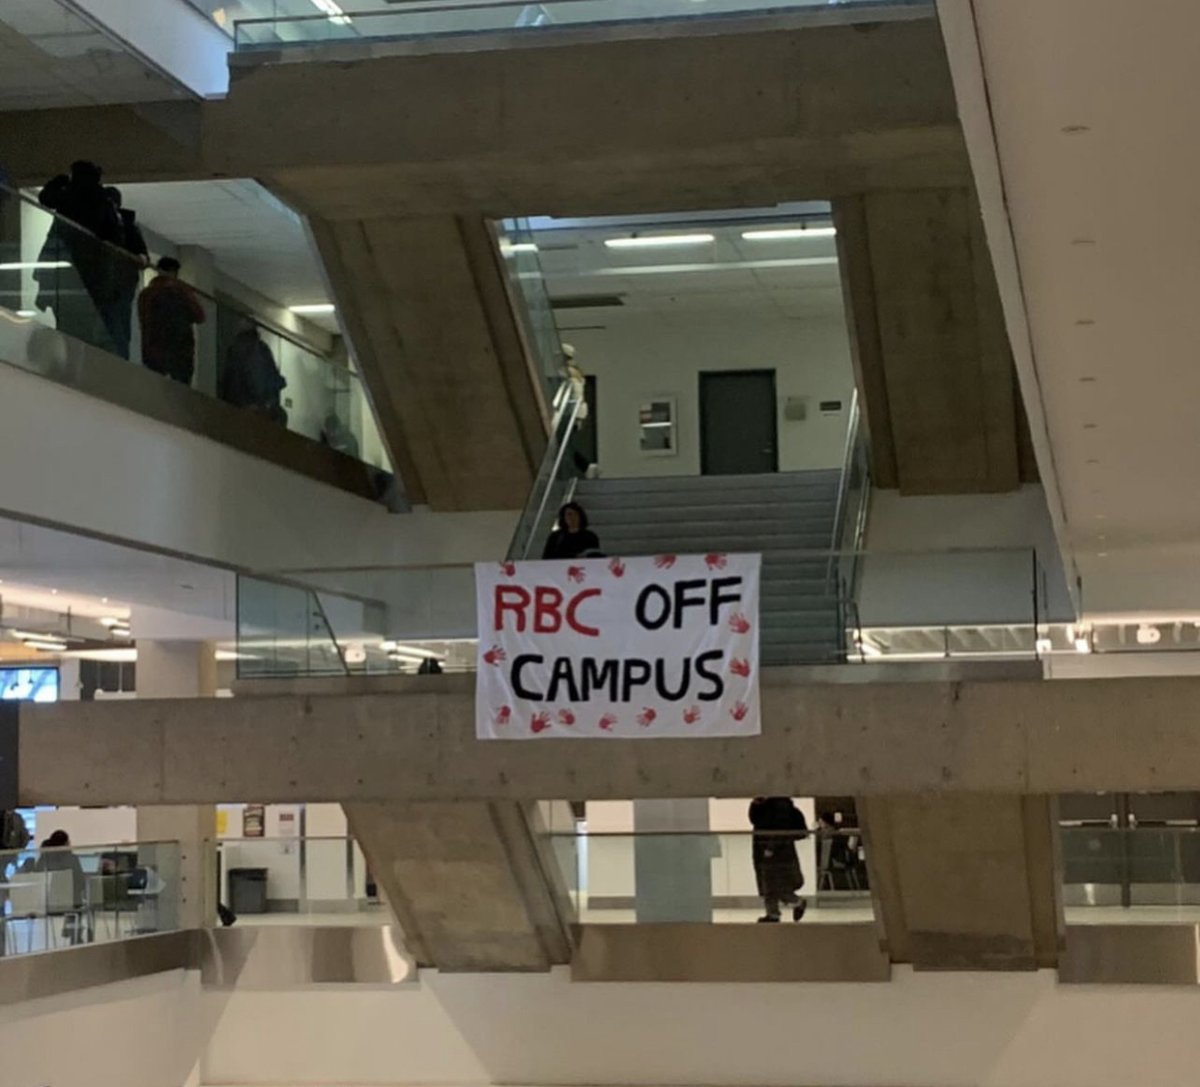 Students at the University of Alberta have dropped a banner calling for #RBCOffCampus! Students refuse to allow Canada's biggest funder of fossil fuels to continue business as usual on our campuses. @RBC divest and respect Indigenous rights!